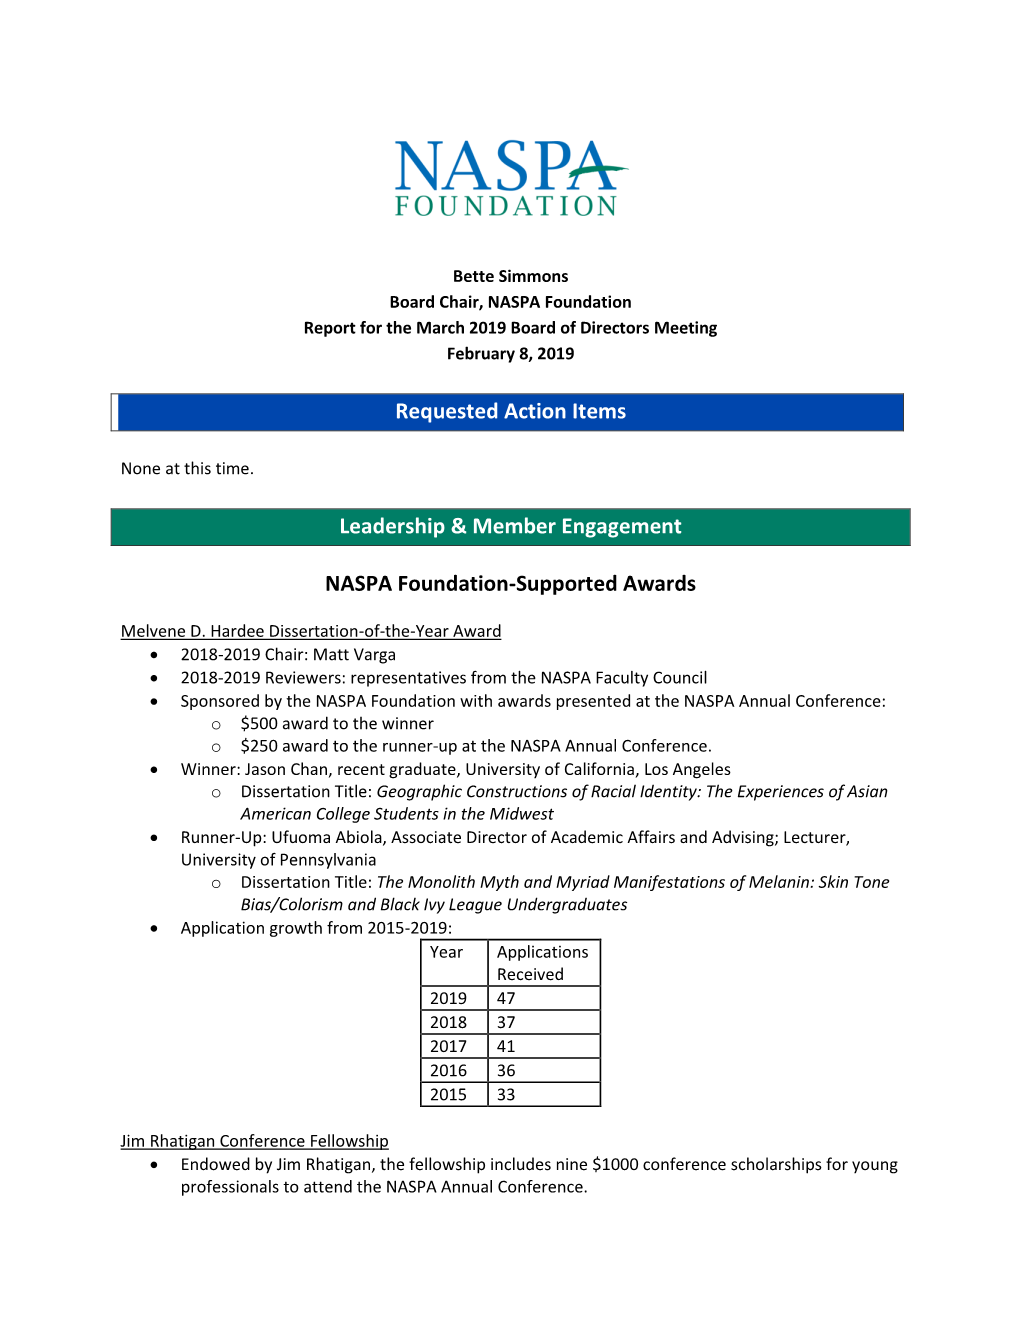 NASPA Foundation Report for the March 2019 Board of Directors Meeting February 8, 2019